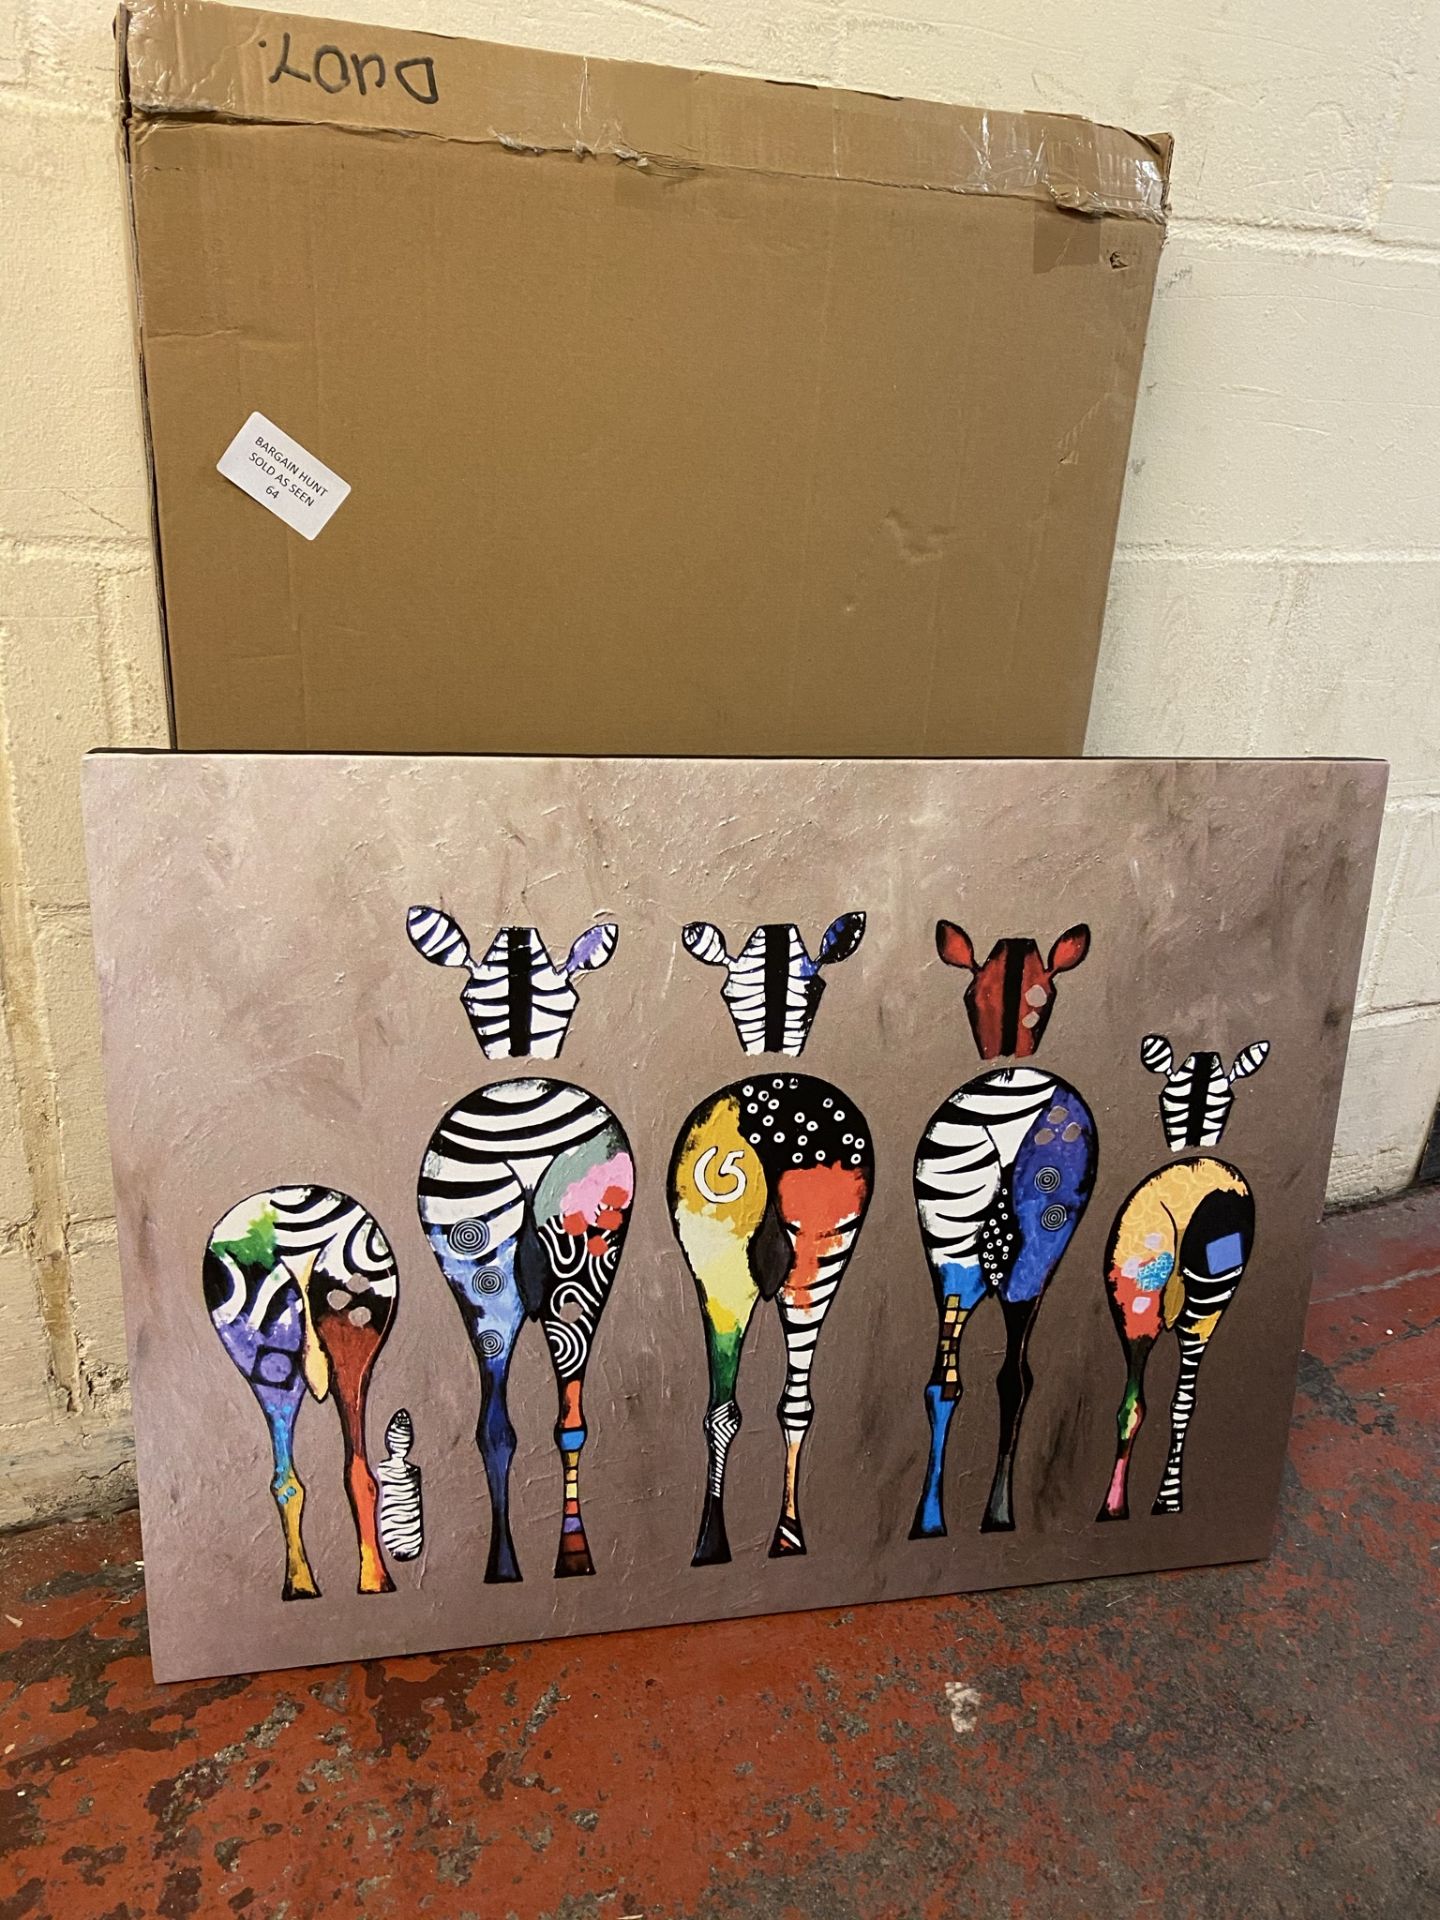 Zebras Abstract Colourful Canvas Wall Art 32 x 24 Inch RRP £37.99 - Image 2 of 2